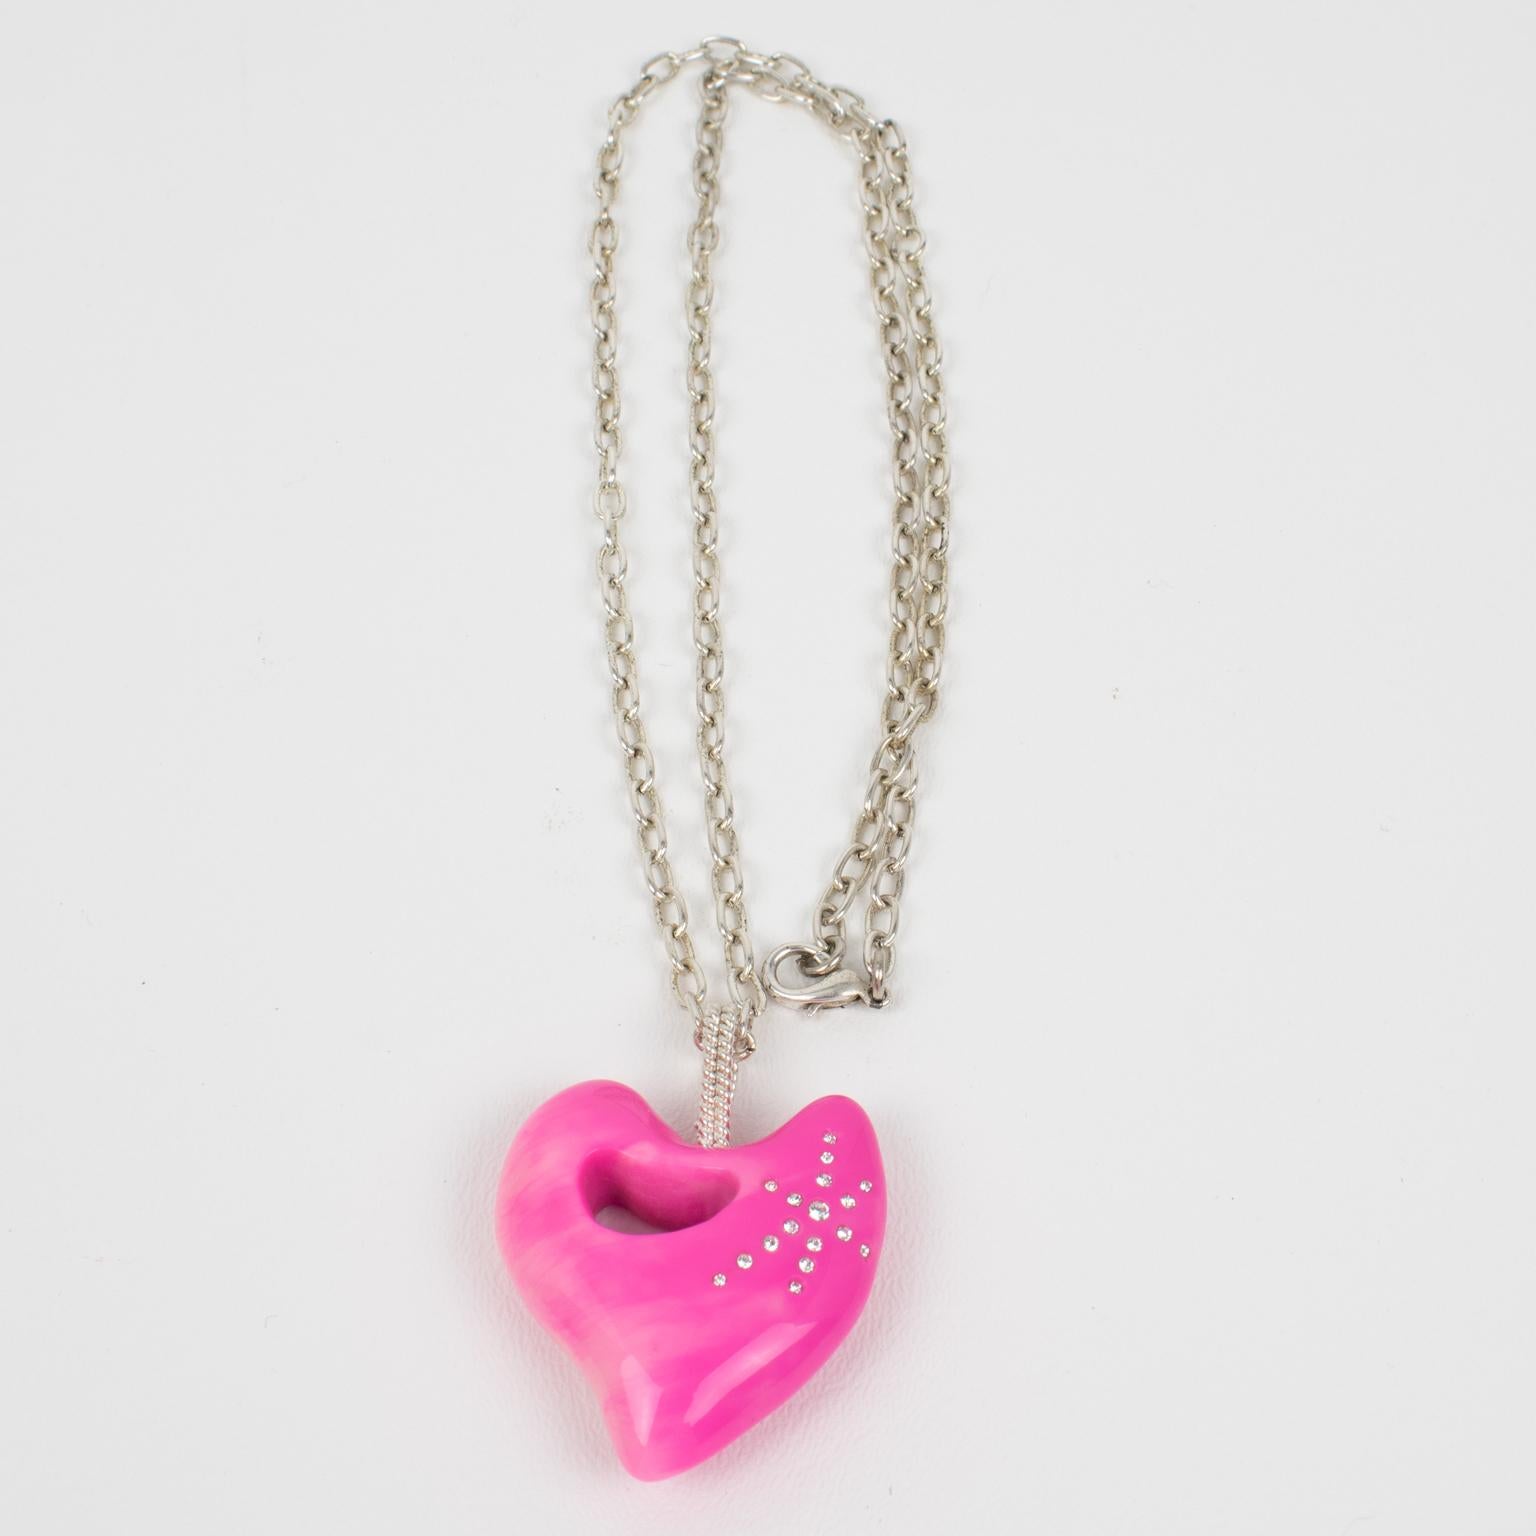 This lovely Christian Lacroix Paris pendant necklace features a long silver plate chain complimented with a dimensional resin heart ornate with crystal rhinestones. Fabulous hot pink color, all marbled and swirled. The pendant has silvered metal